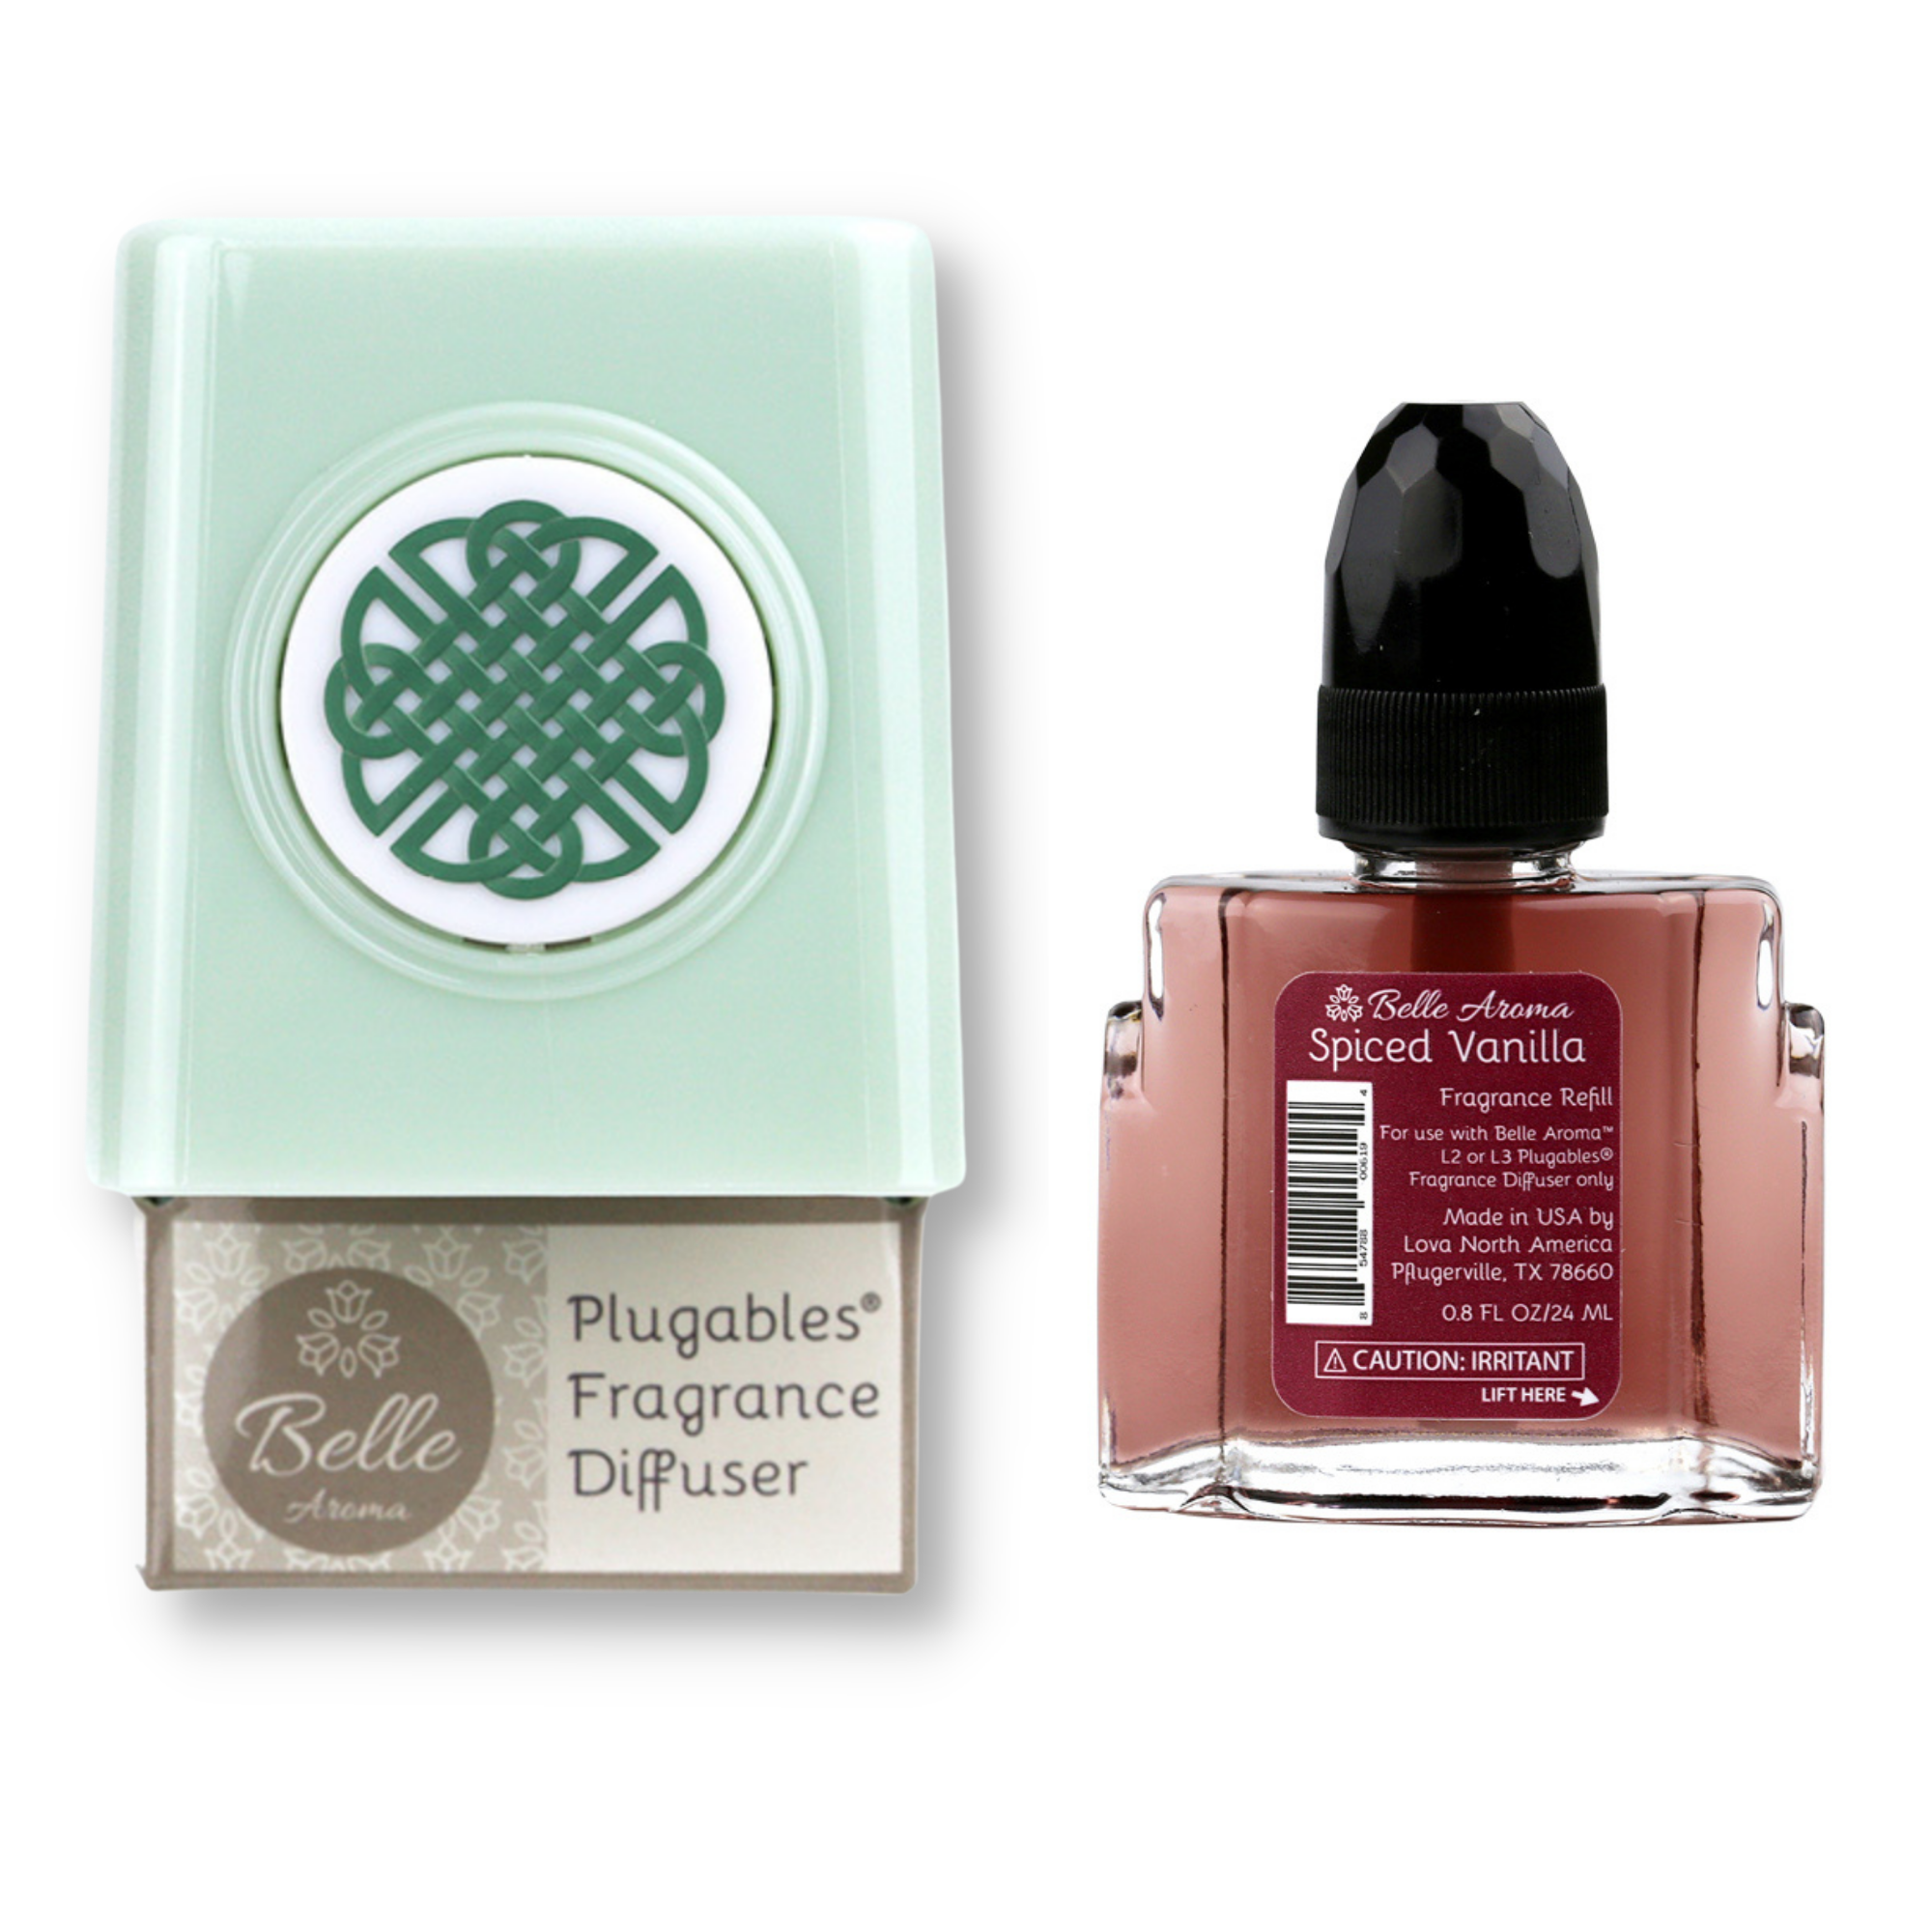 Celtic Knot Medallion Plugables® Plugin Aromalectric® Scented Oil Diffuser - Sea Glass with Spiced Vanilla Fragrance Oil Home Fragrance Accessories